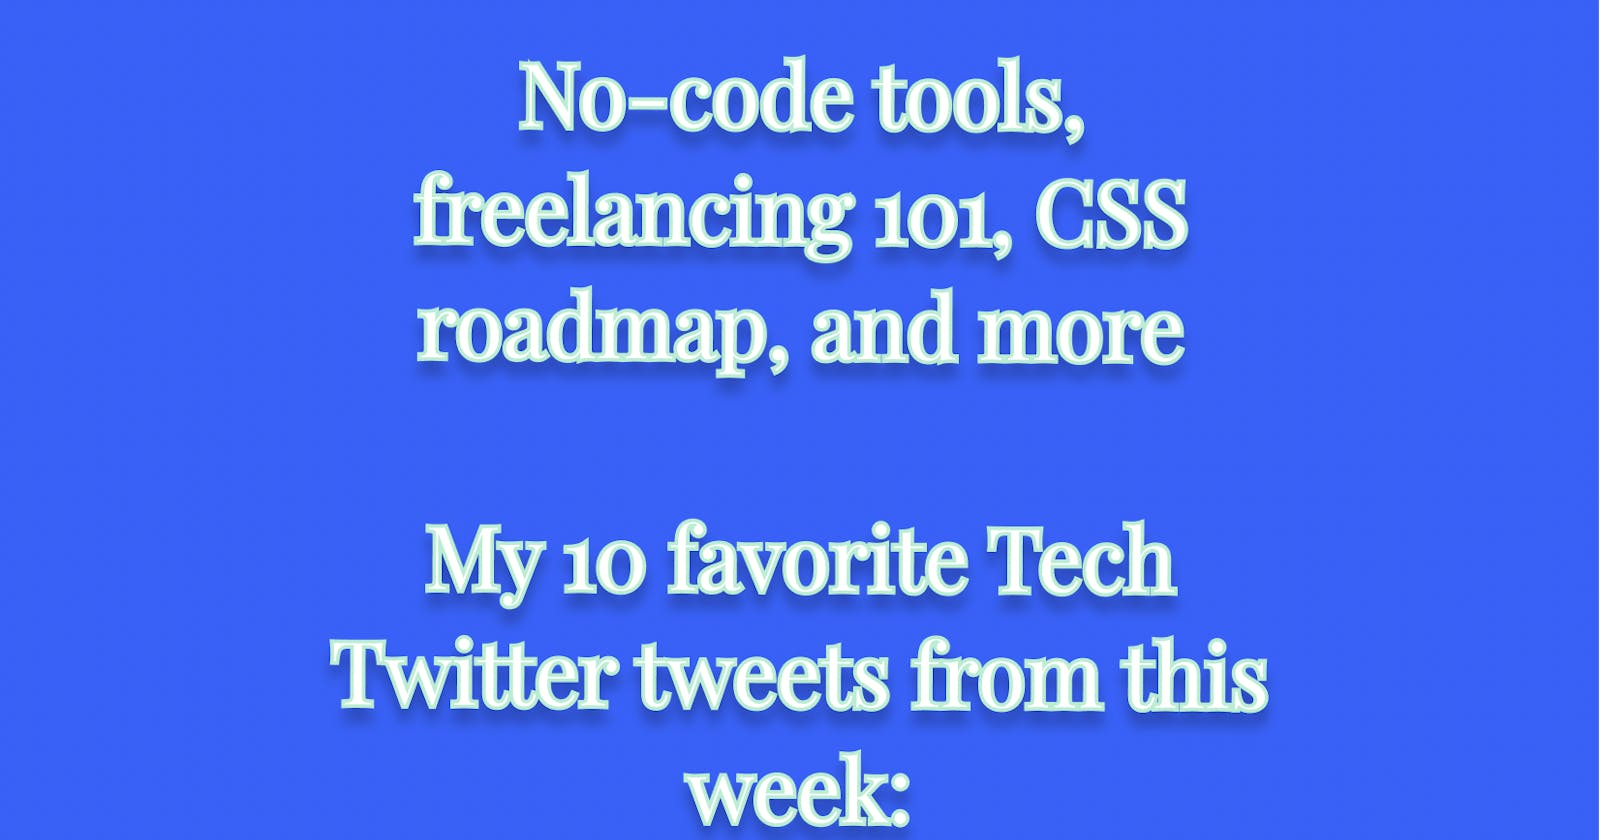 No-code tools, freelancing 101, CSS roadmap, and more

My 10 favorite Tech Twitter tweets from this week: